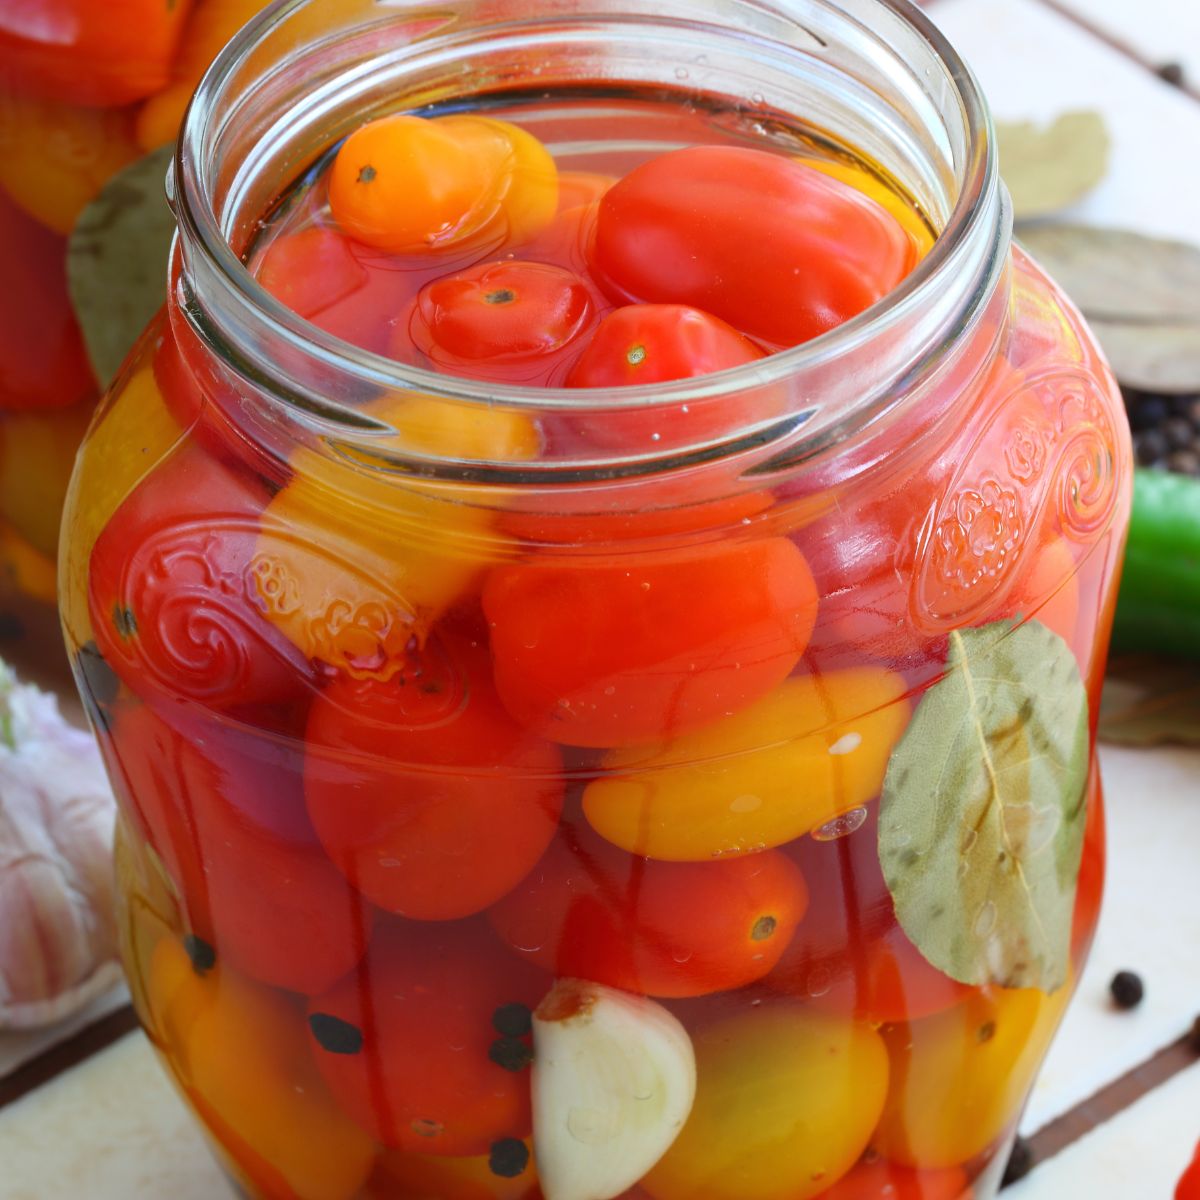 a jar of cherry tomatoes.